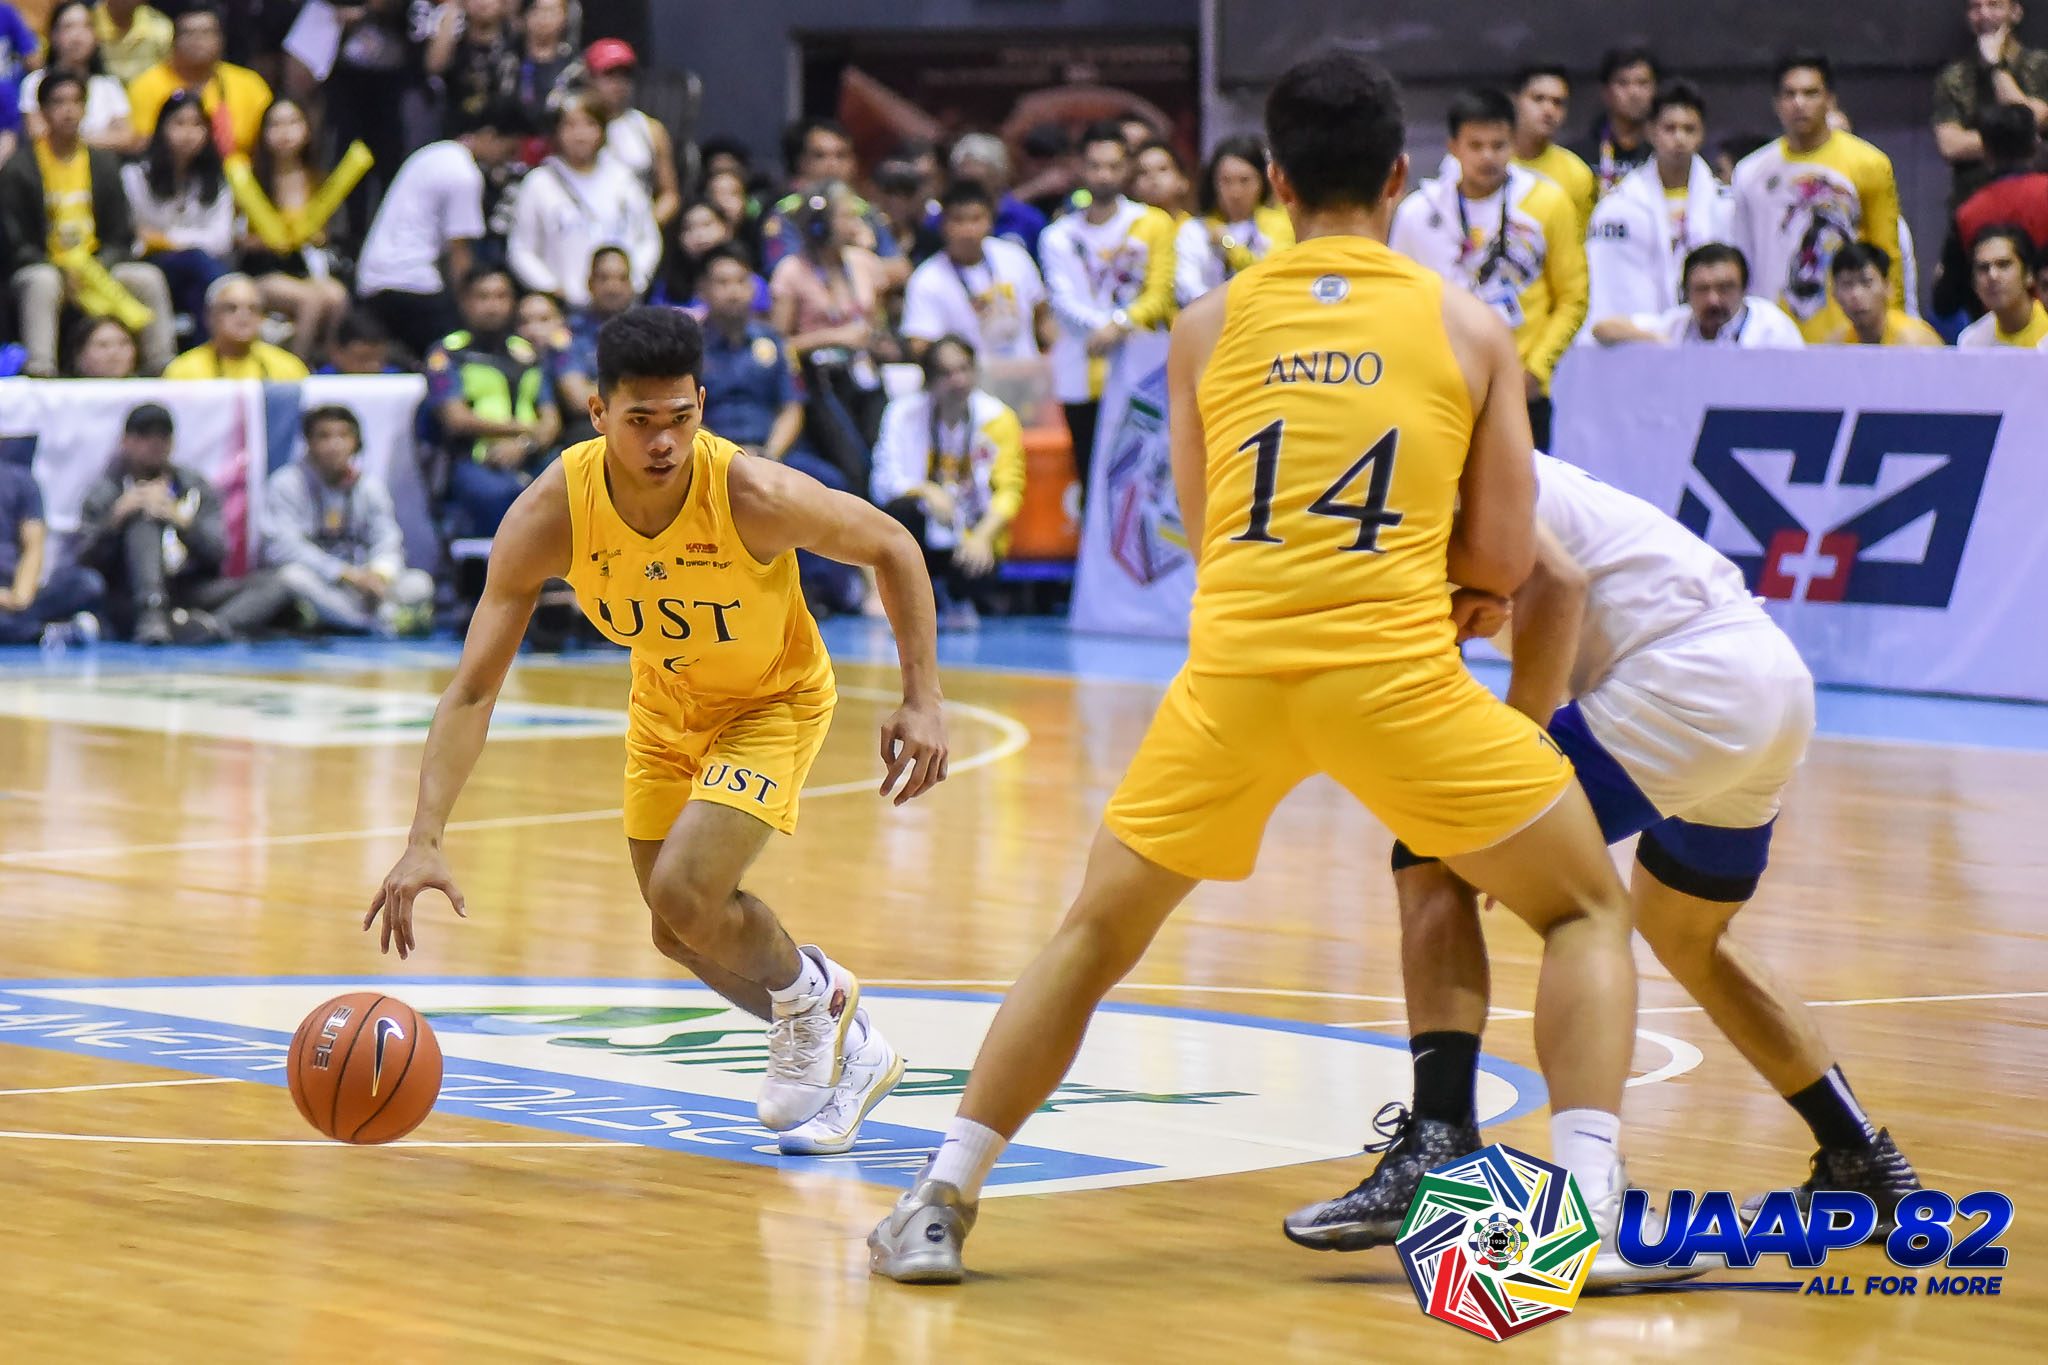 No sanctions on UST, NU yet as UAAP set to reconvene